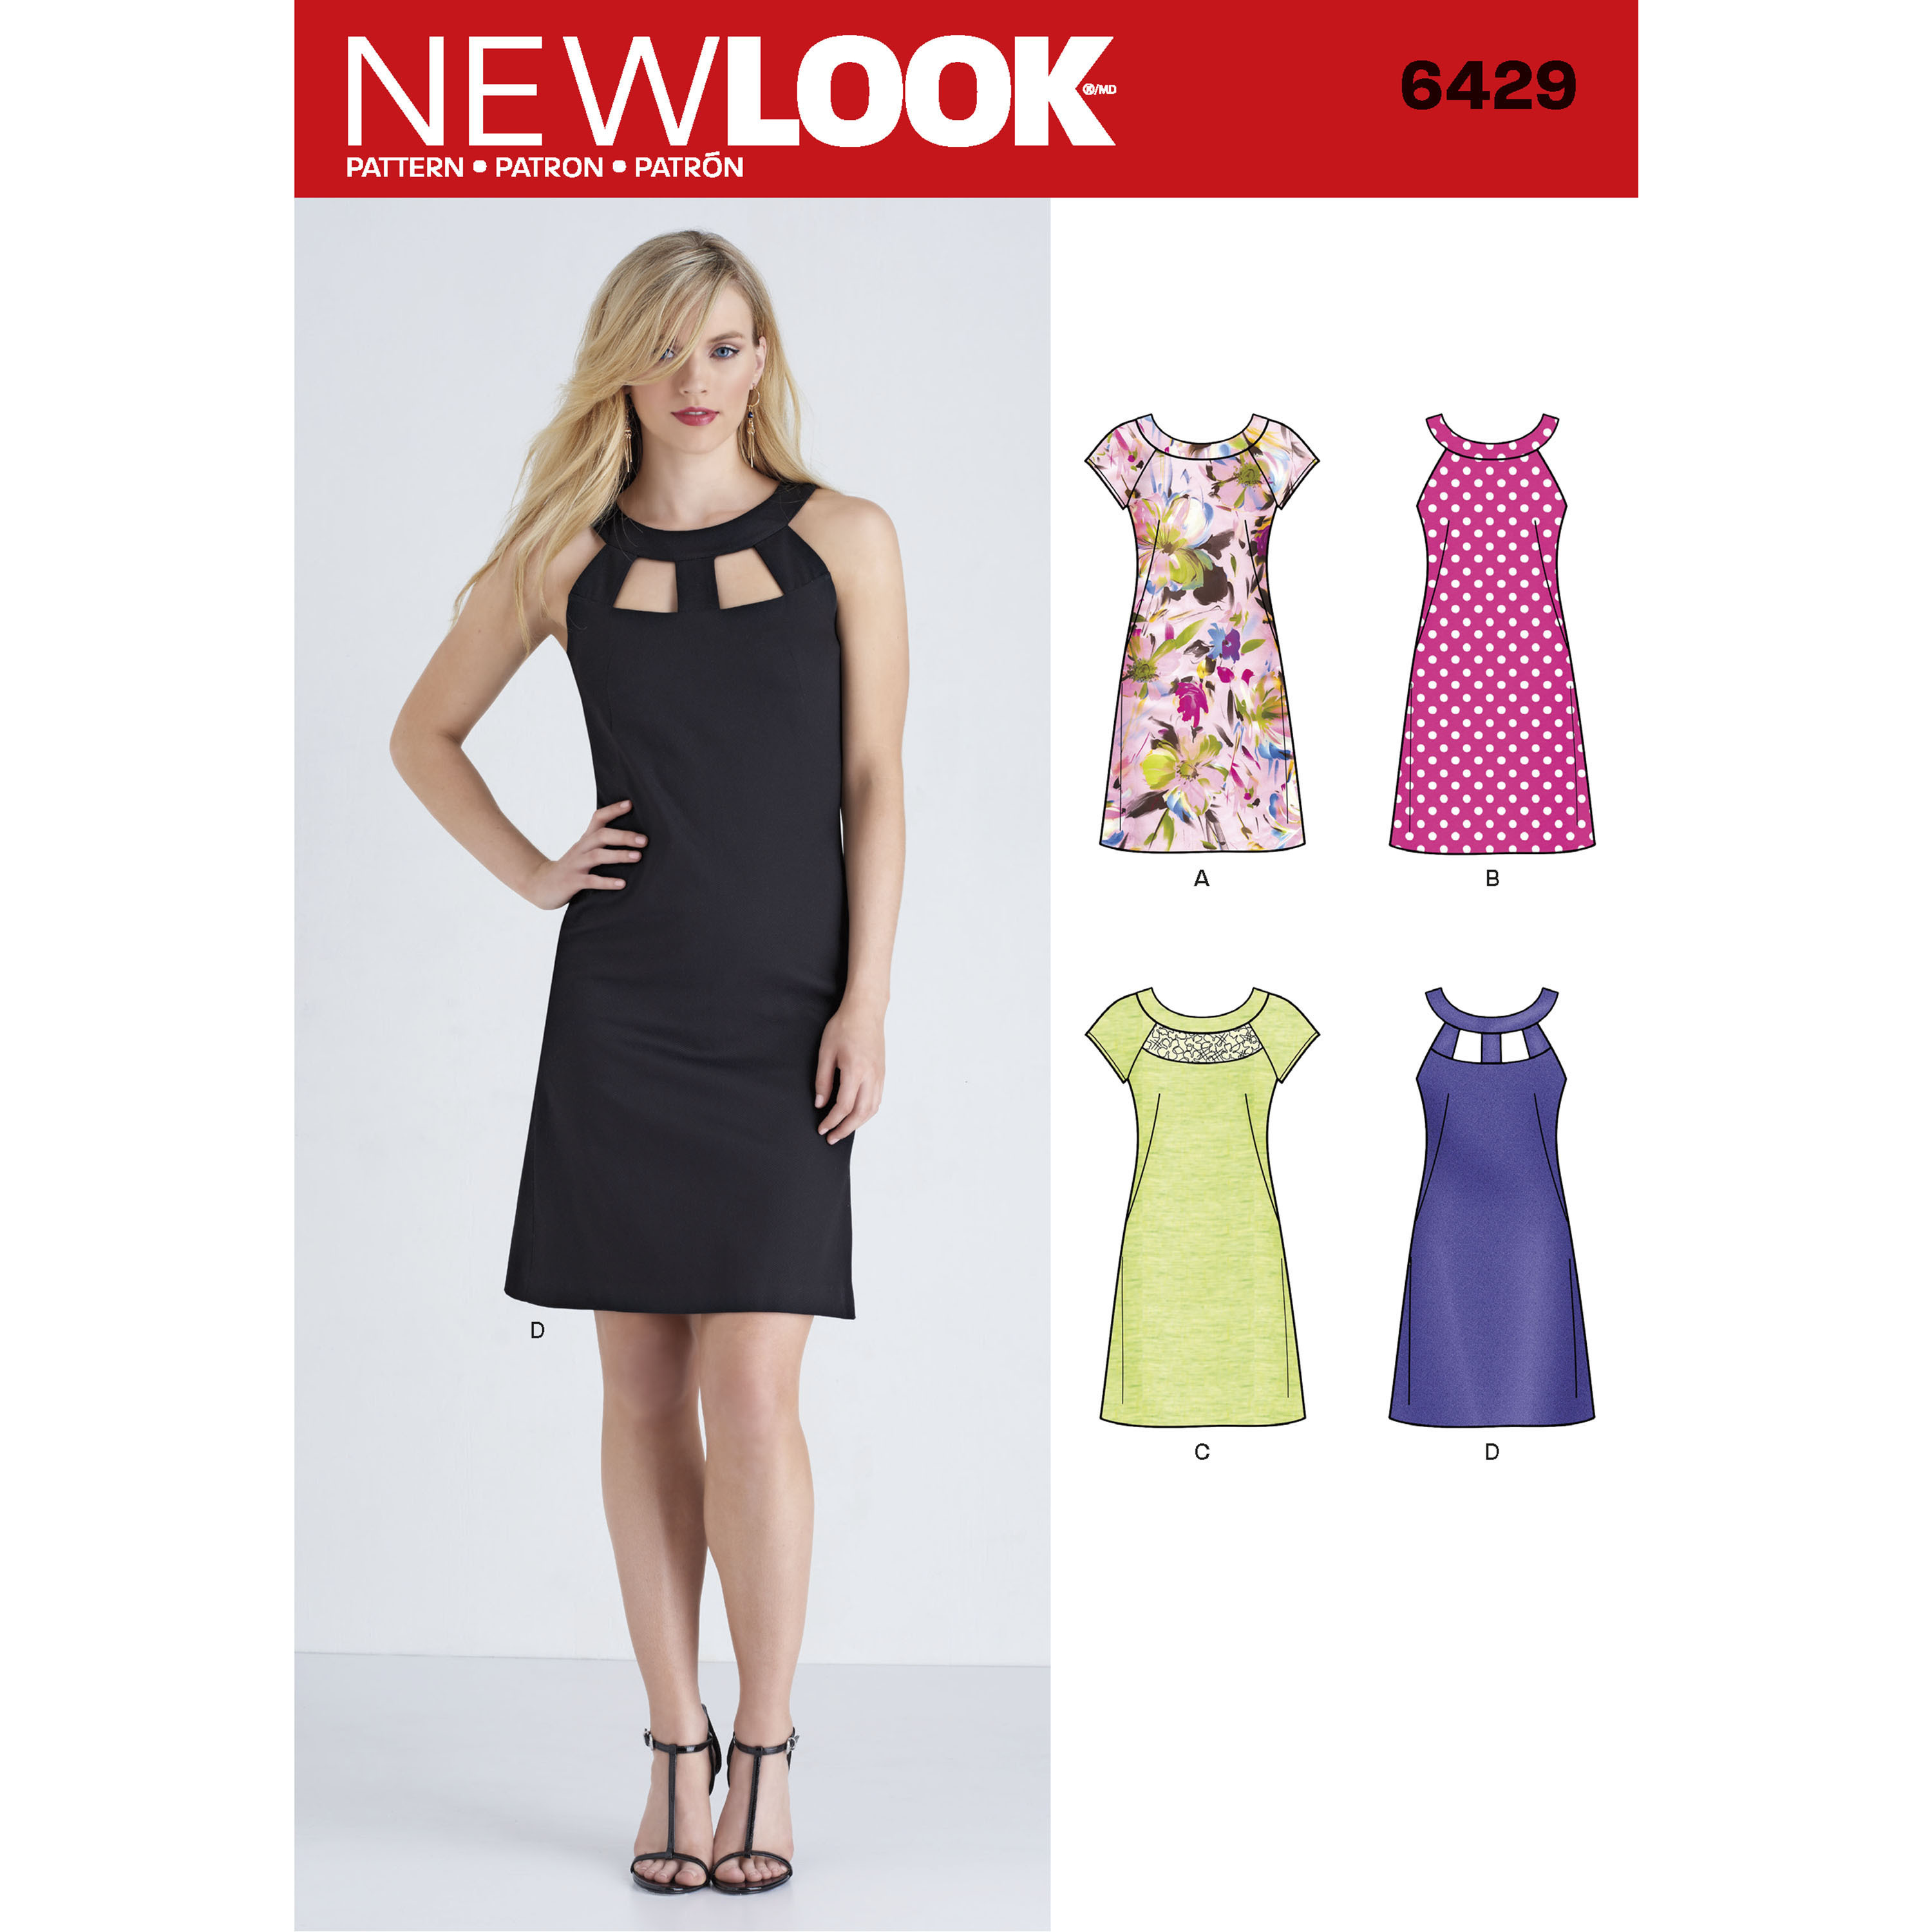 New Look Dresses N6372 - The Fold Line